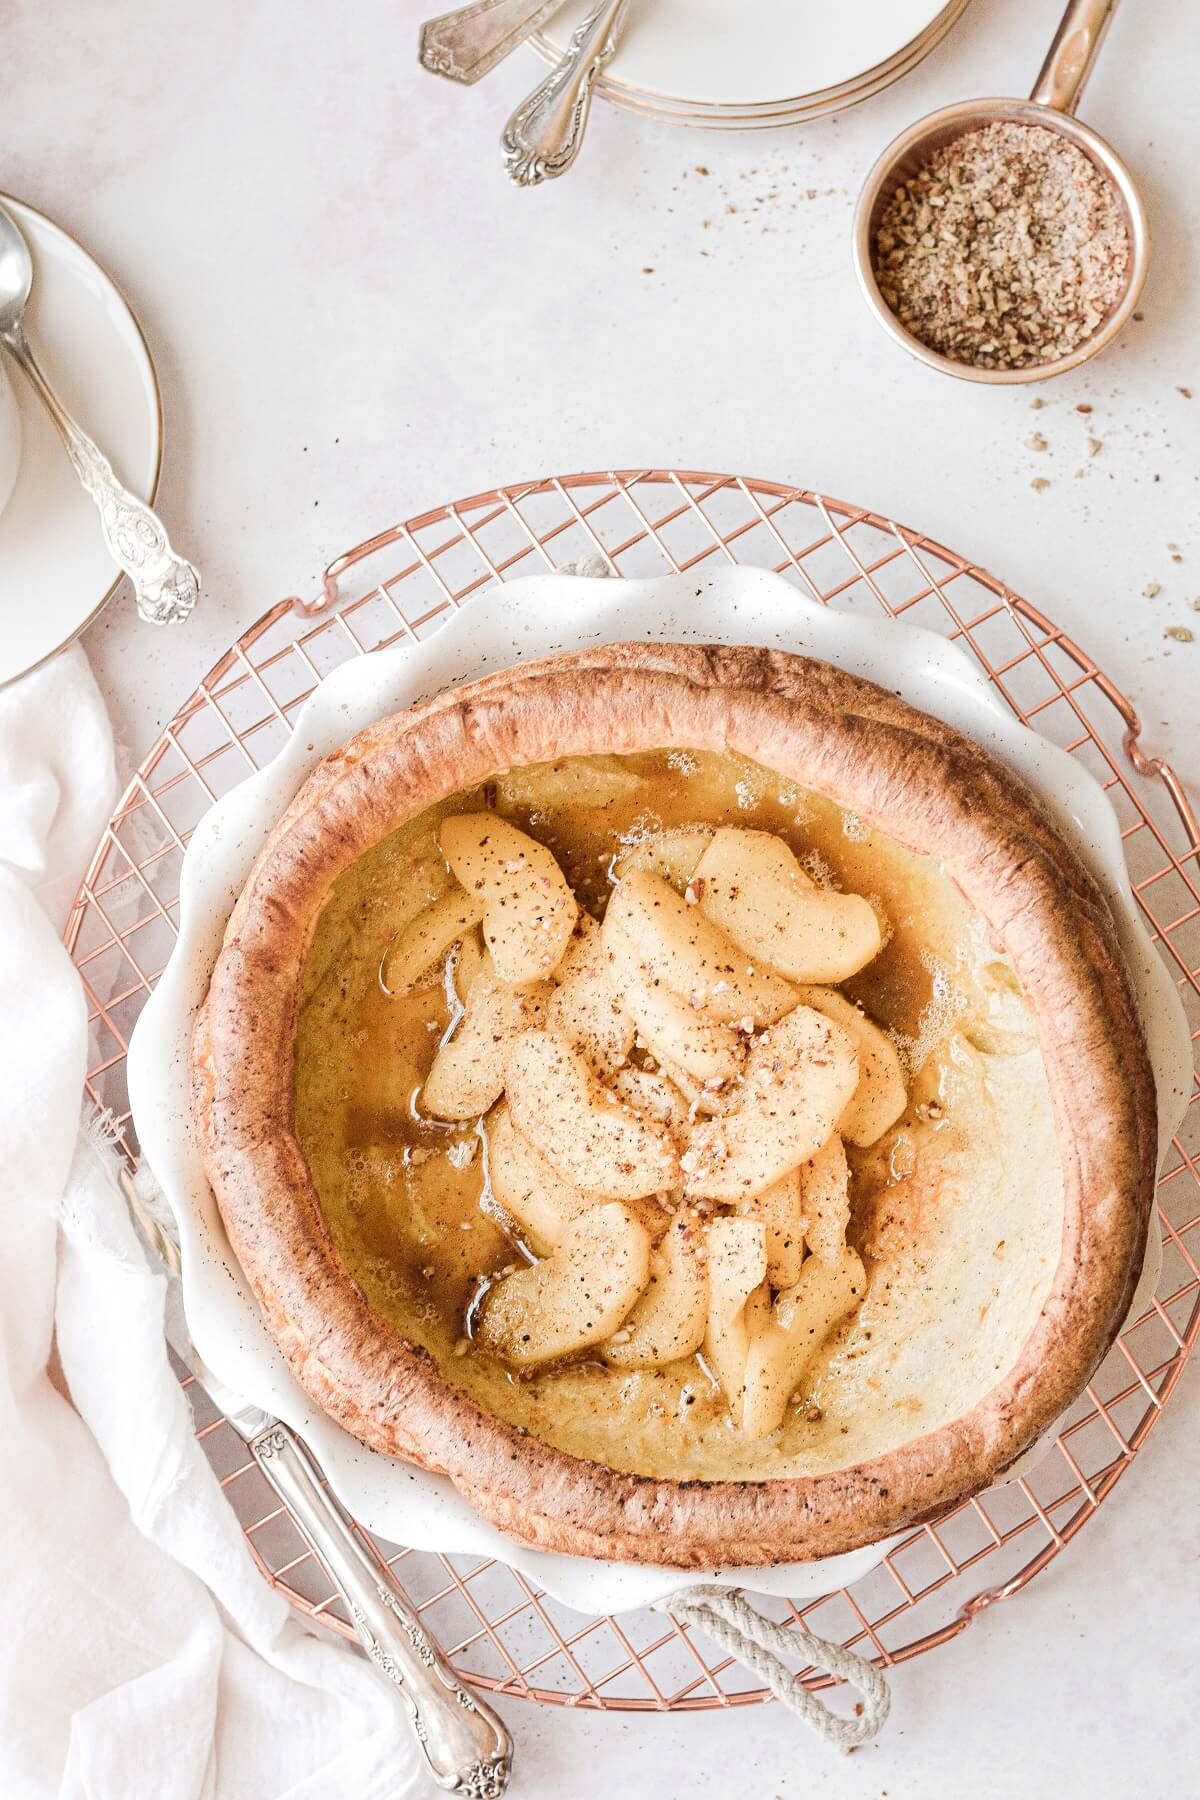 A Dutch baby pancake filled with cinnamon apples and crushed pecans.